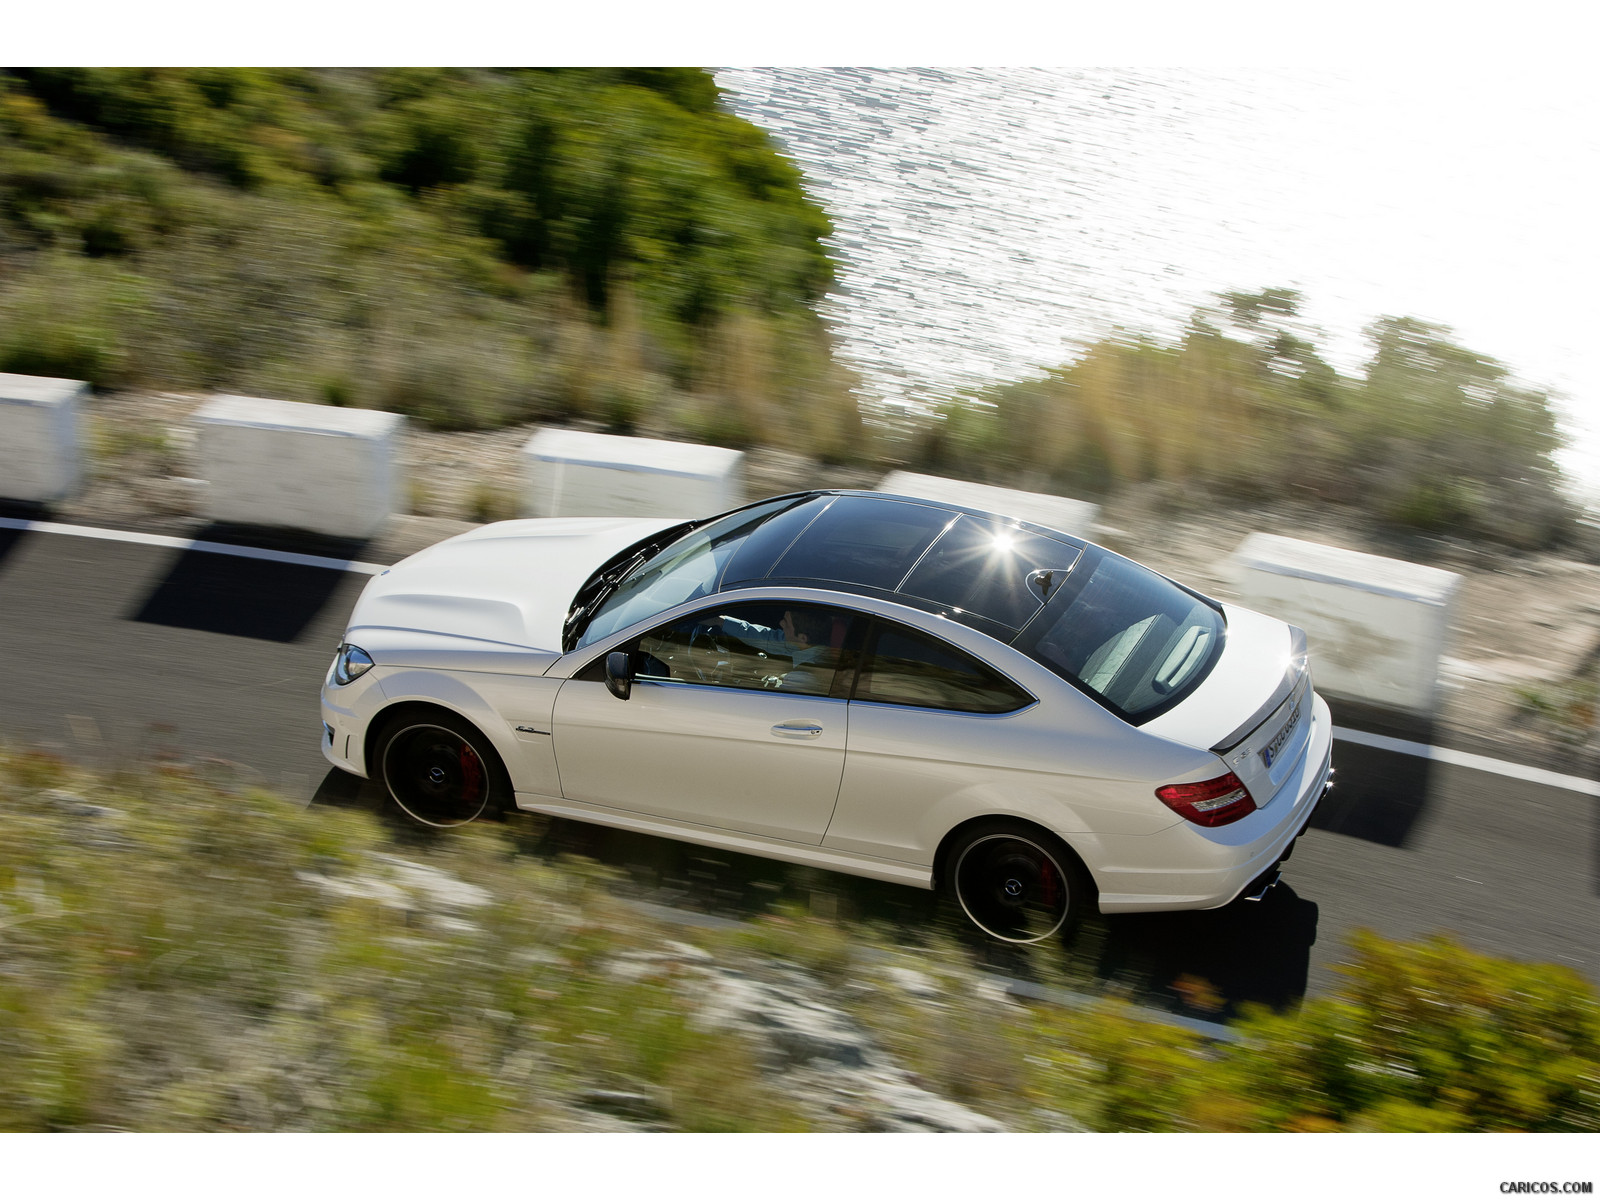 Mercedes-Benz C63 AMG Coupe (2012)  - Top, #51 of 64